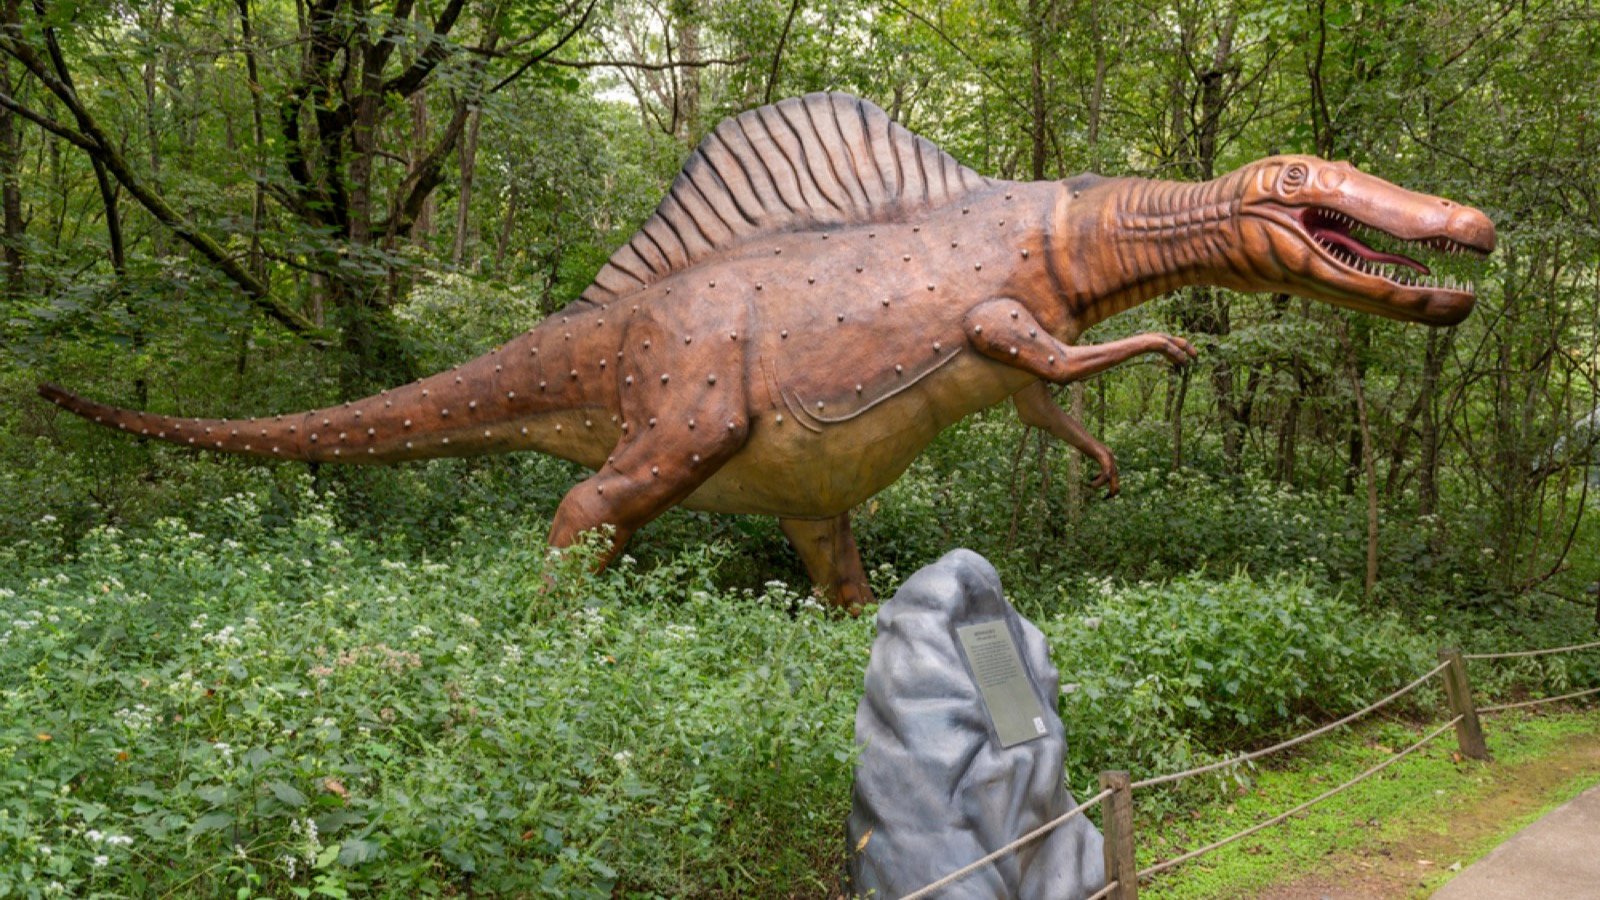 <p>Dinosaur World, in Cave City, is one of the most popular attractions in Kentucky. This amusement center has hundreds of life-sized dinosaurs and a dinosaur-themed children’s playground. The center welcomes dogs on leashes in all areas except the indoor museum. Dinosaur World has a 5,000-square-foot gift shop to buy dinosaur-themed artifacts, games, and toys.</p>